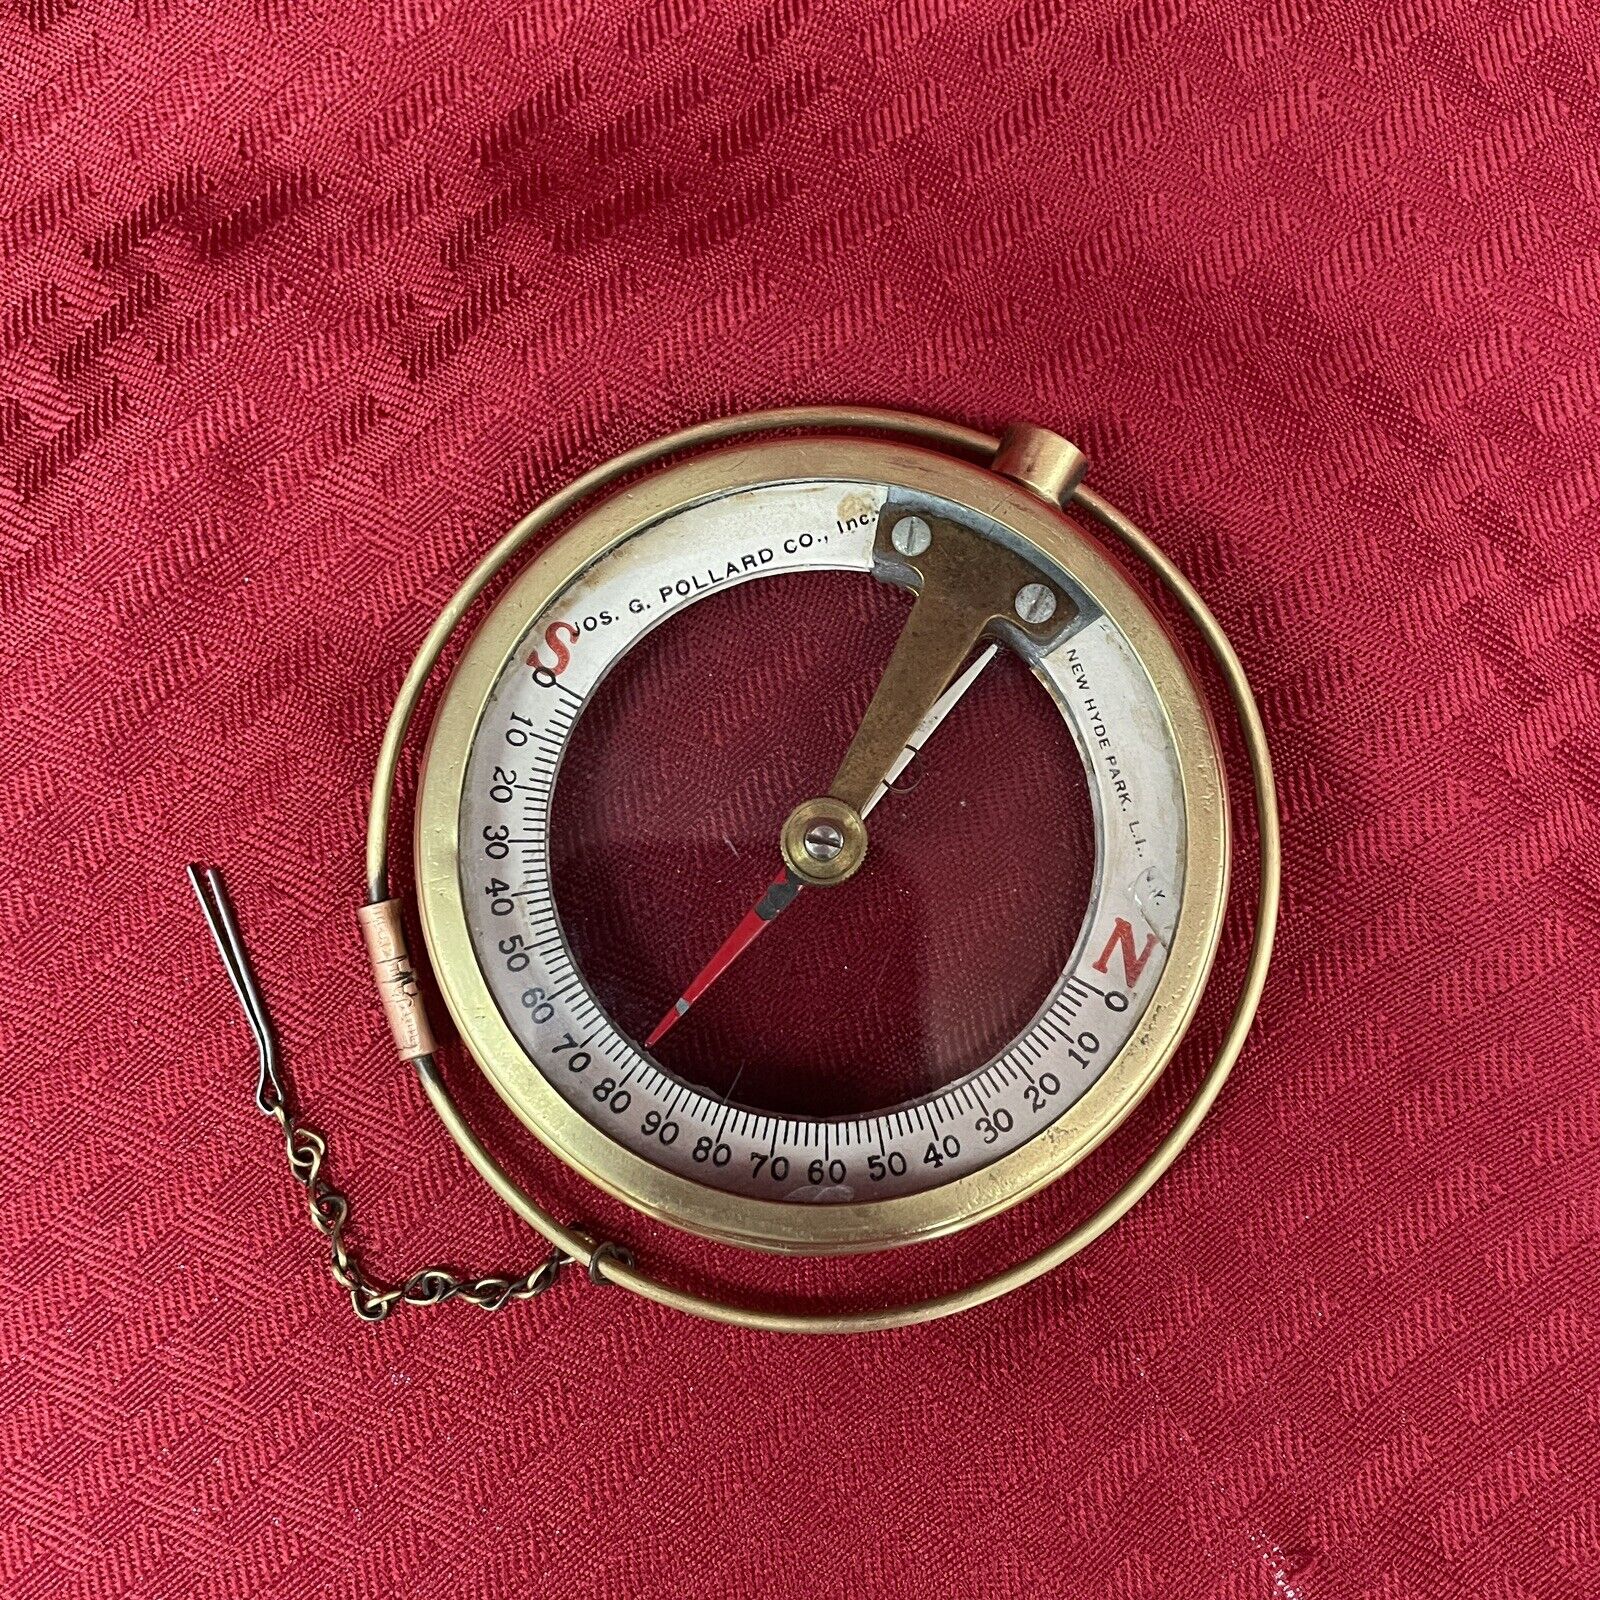 ANTIQUE G. POLLARD AND CO DIPPING NEEDLE COMPASS